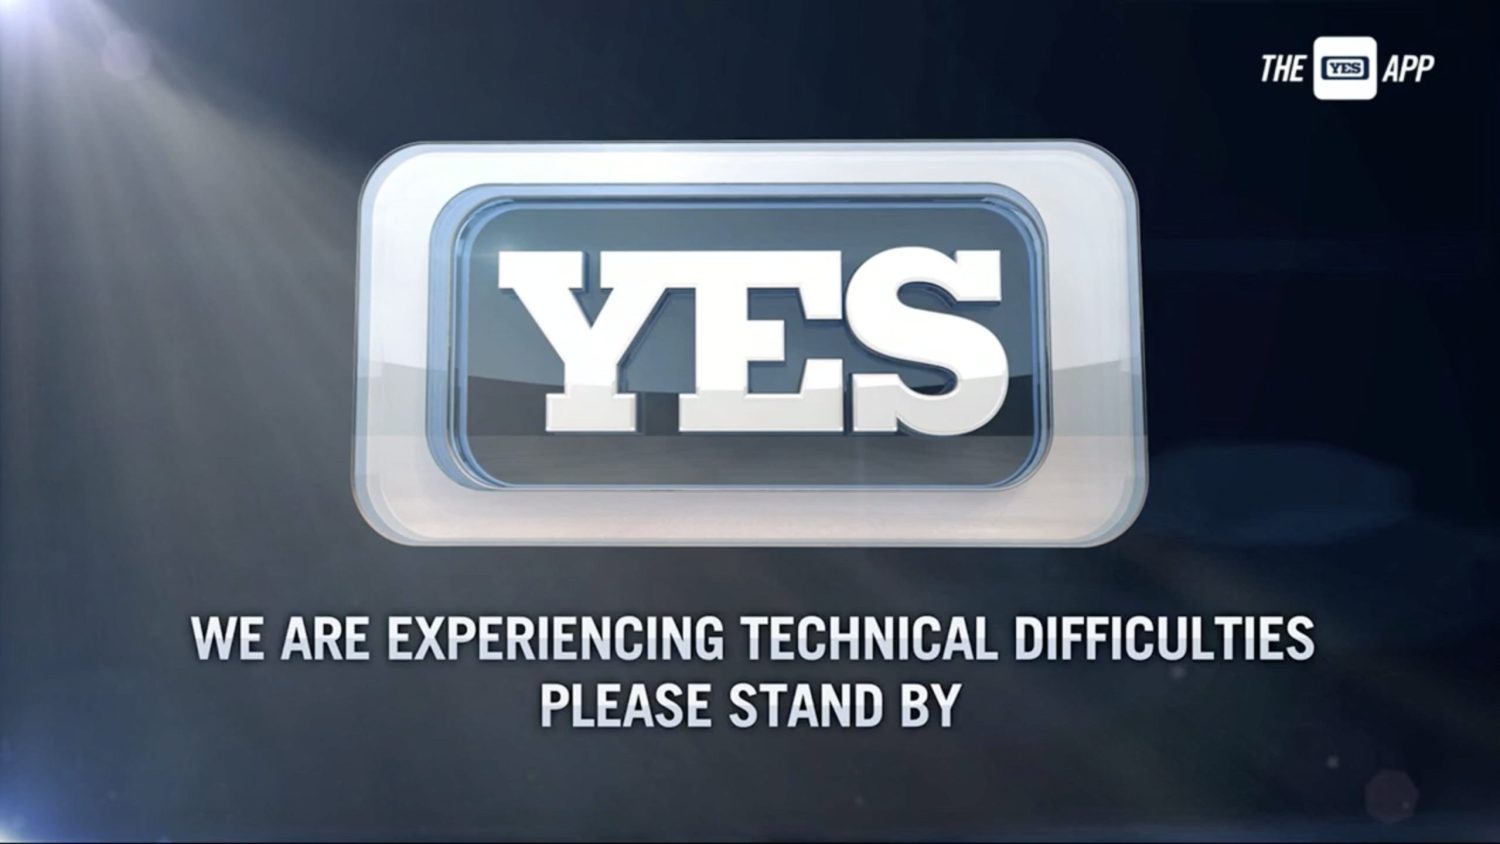 YES Network experiencing technical difficulties